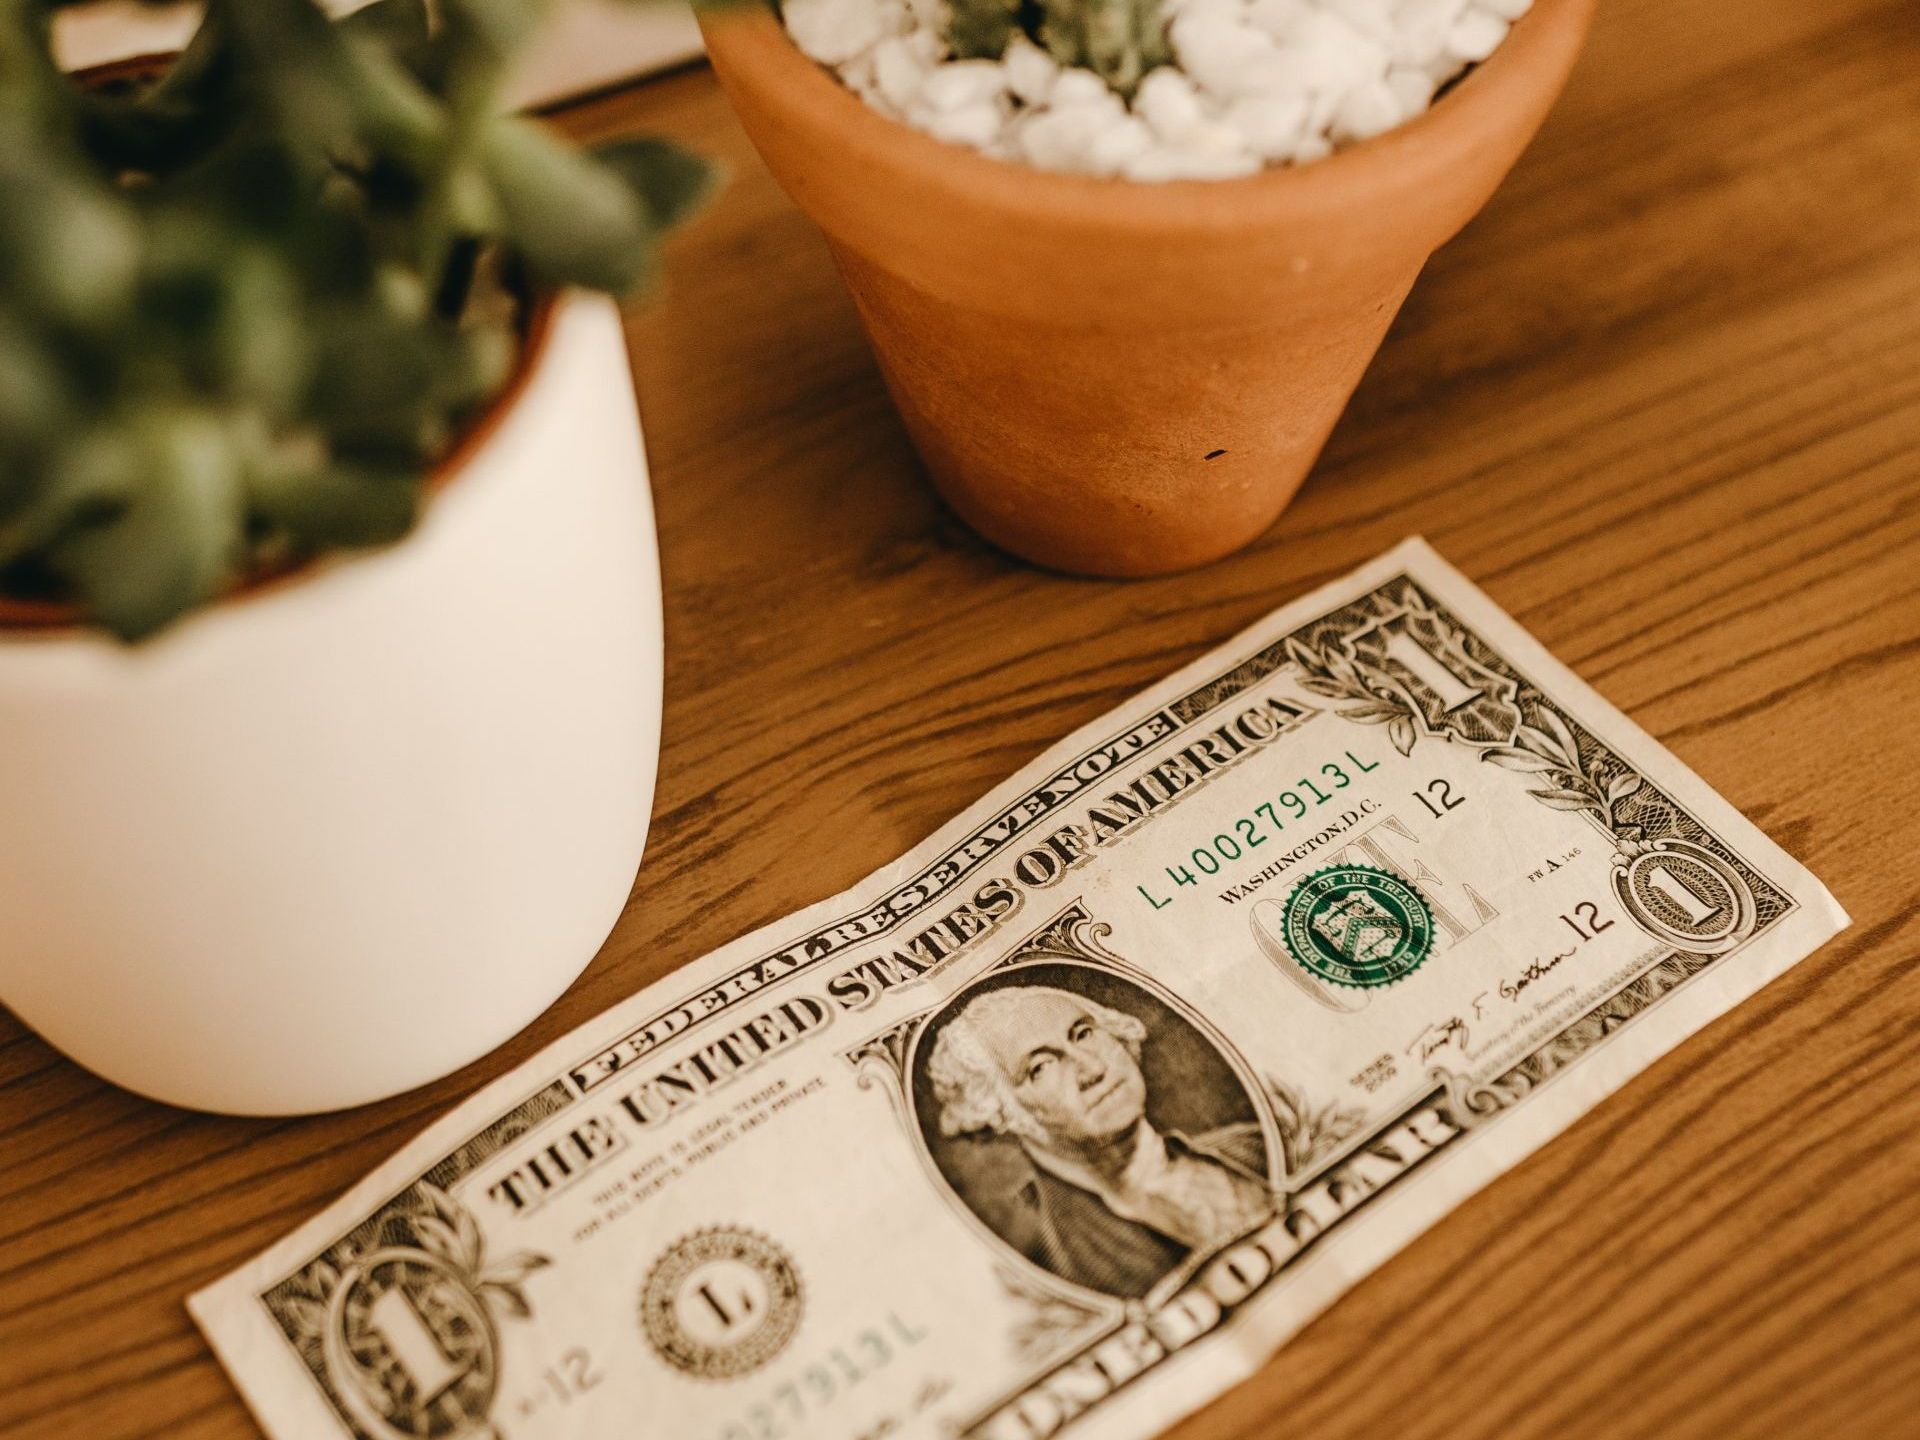 A dollar bill is sitting on a wooden table next to a potted plant.